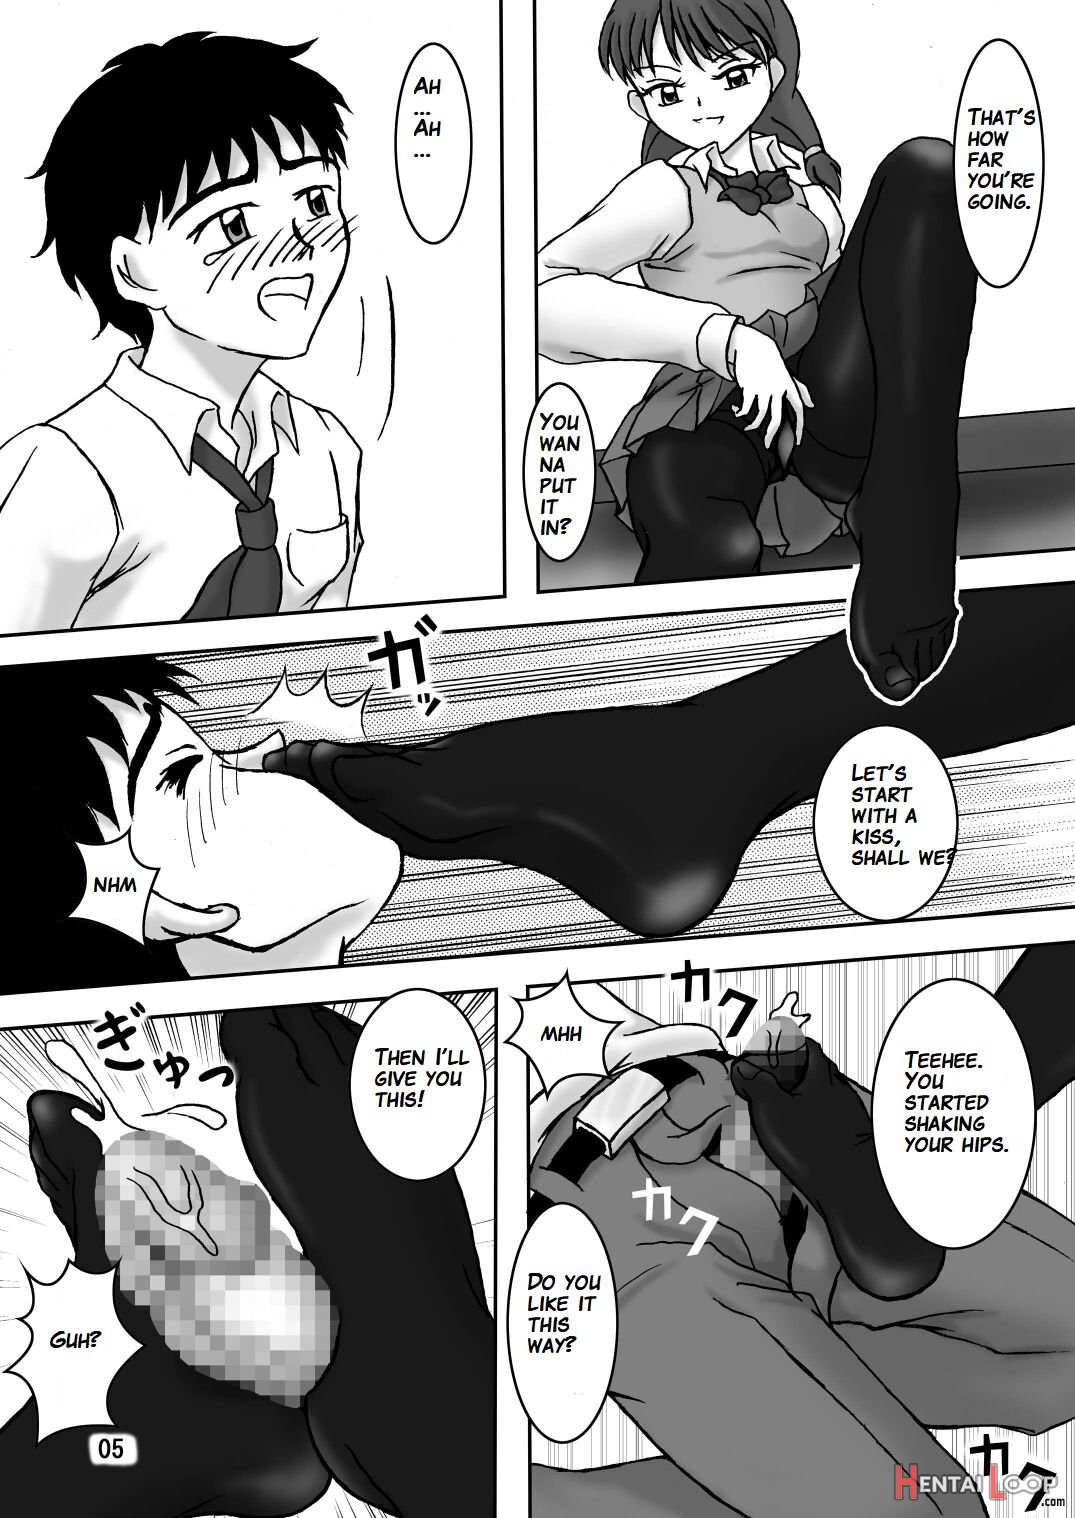 Tights, Please 2 page 6